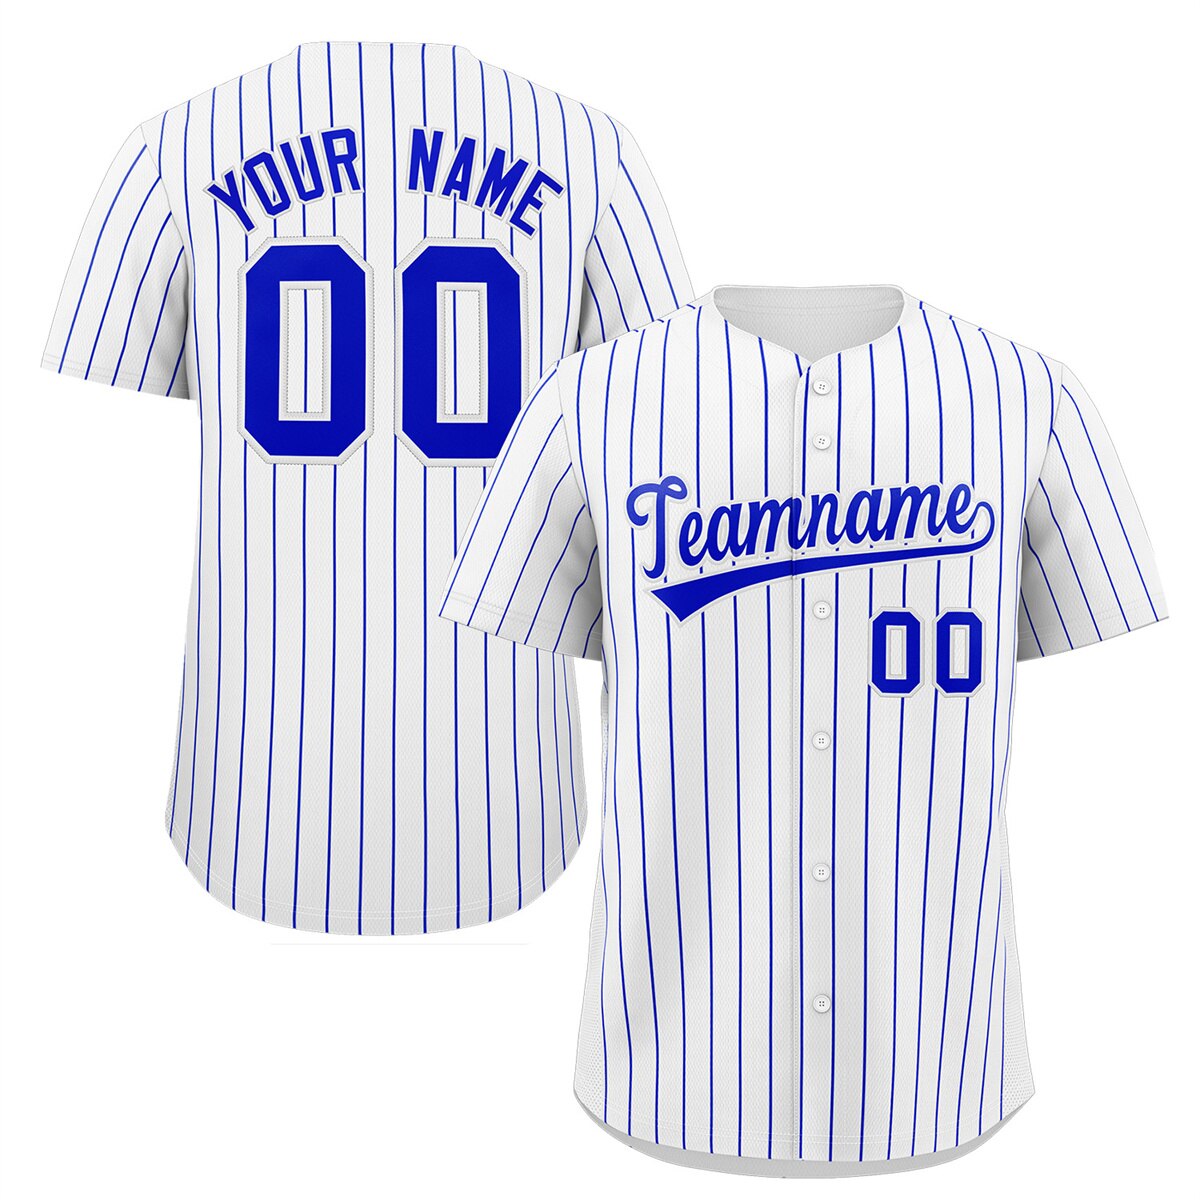 Custom Pinstripe Baseball Jersey Button Down Shirt Printed or Personalized Name Number for